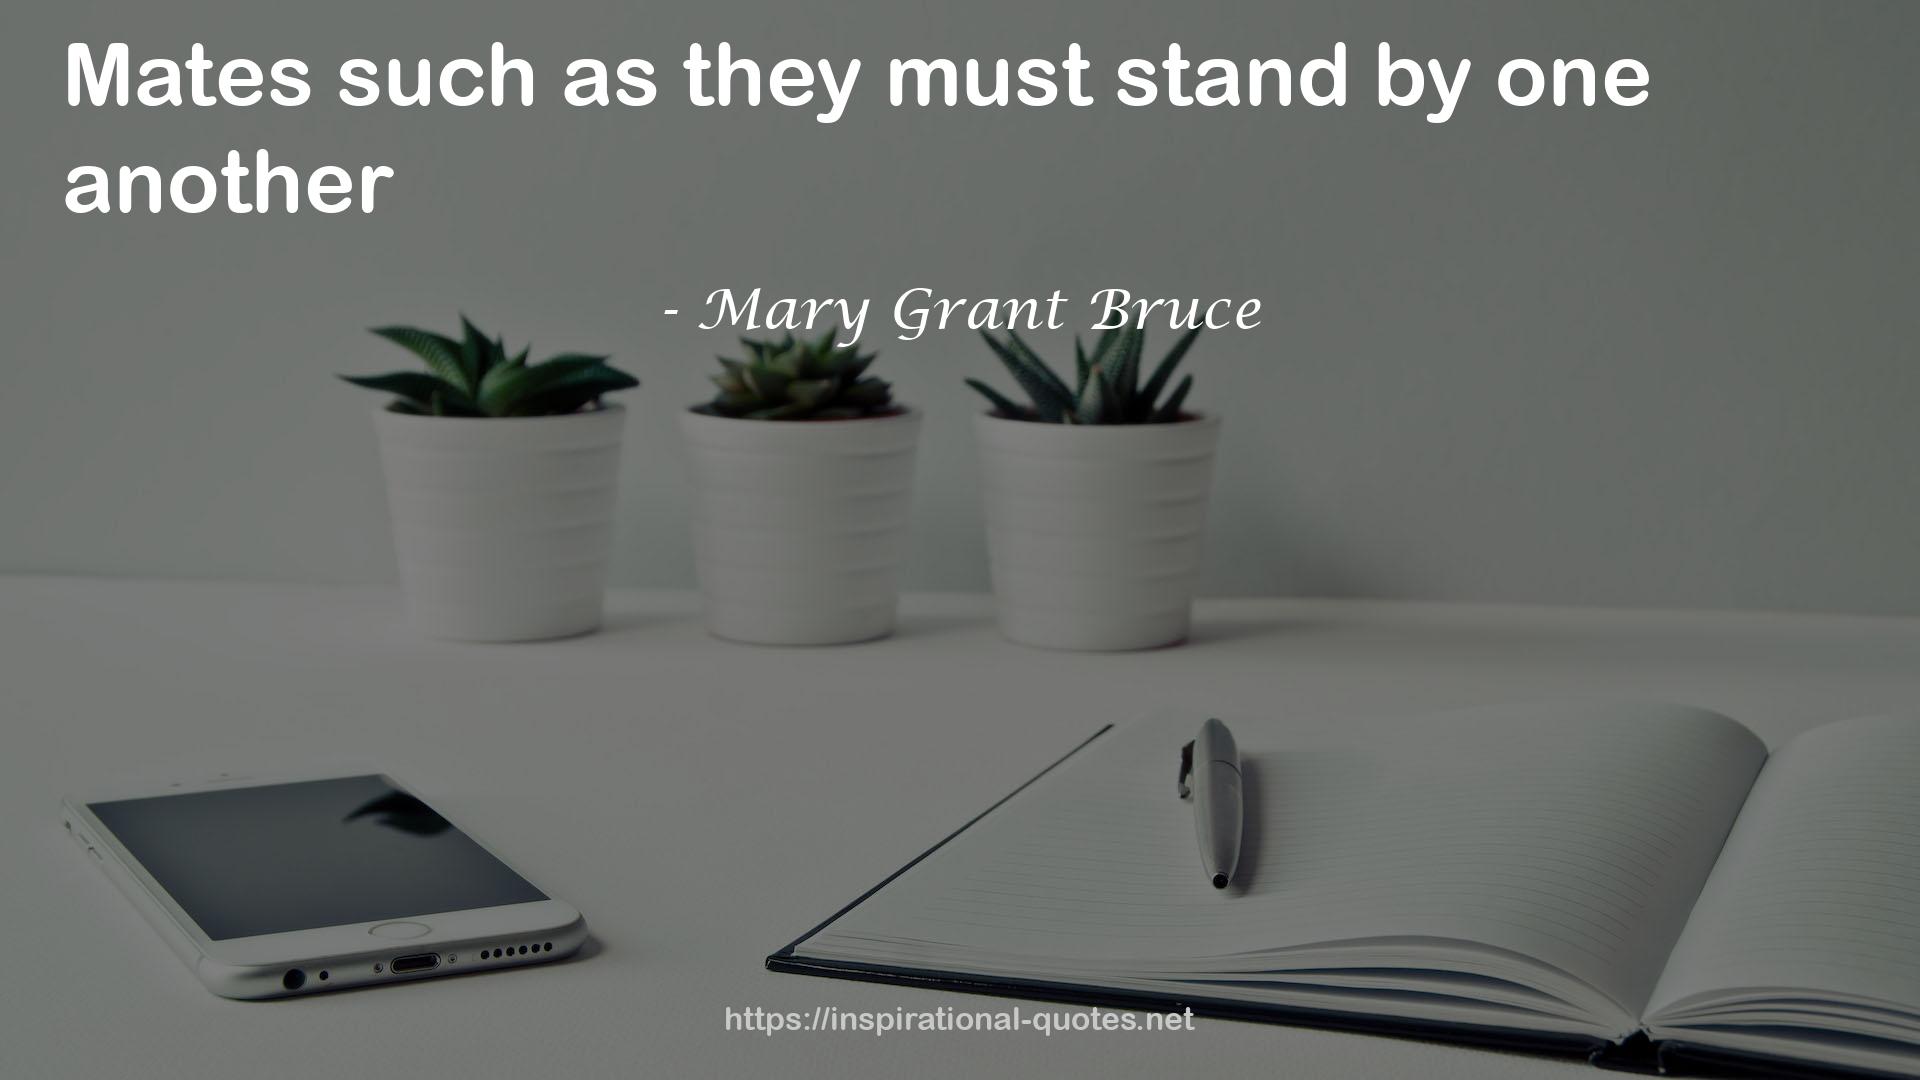 Mary Grant Bruce QUOTES